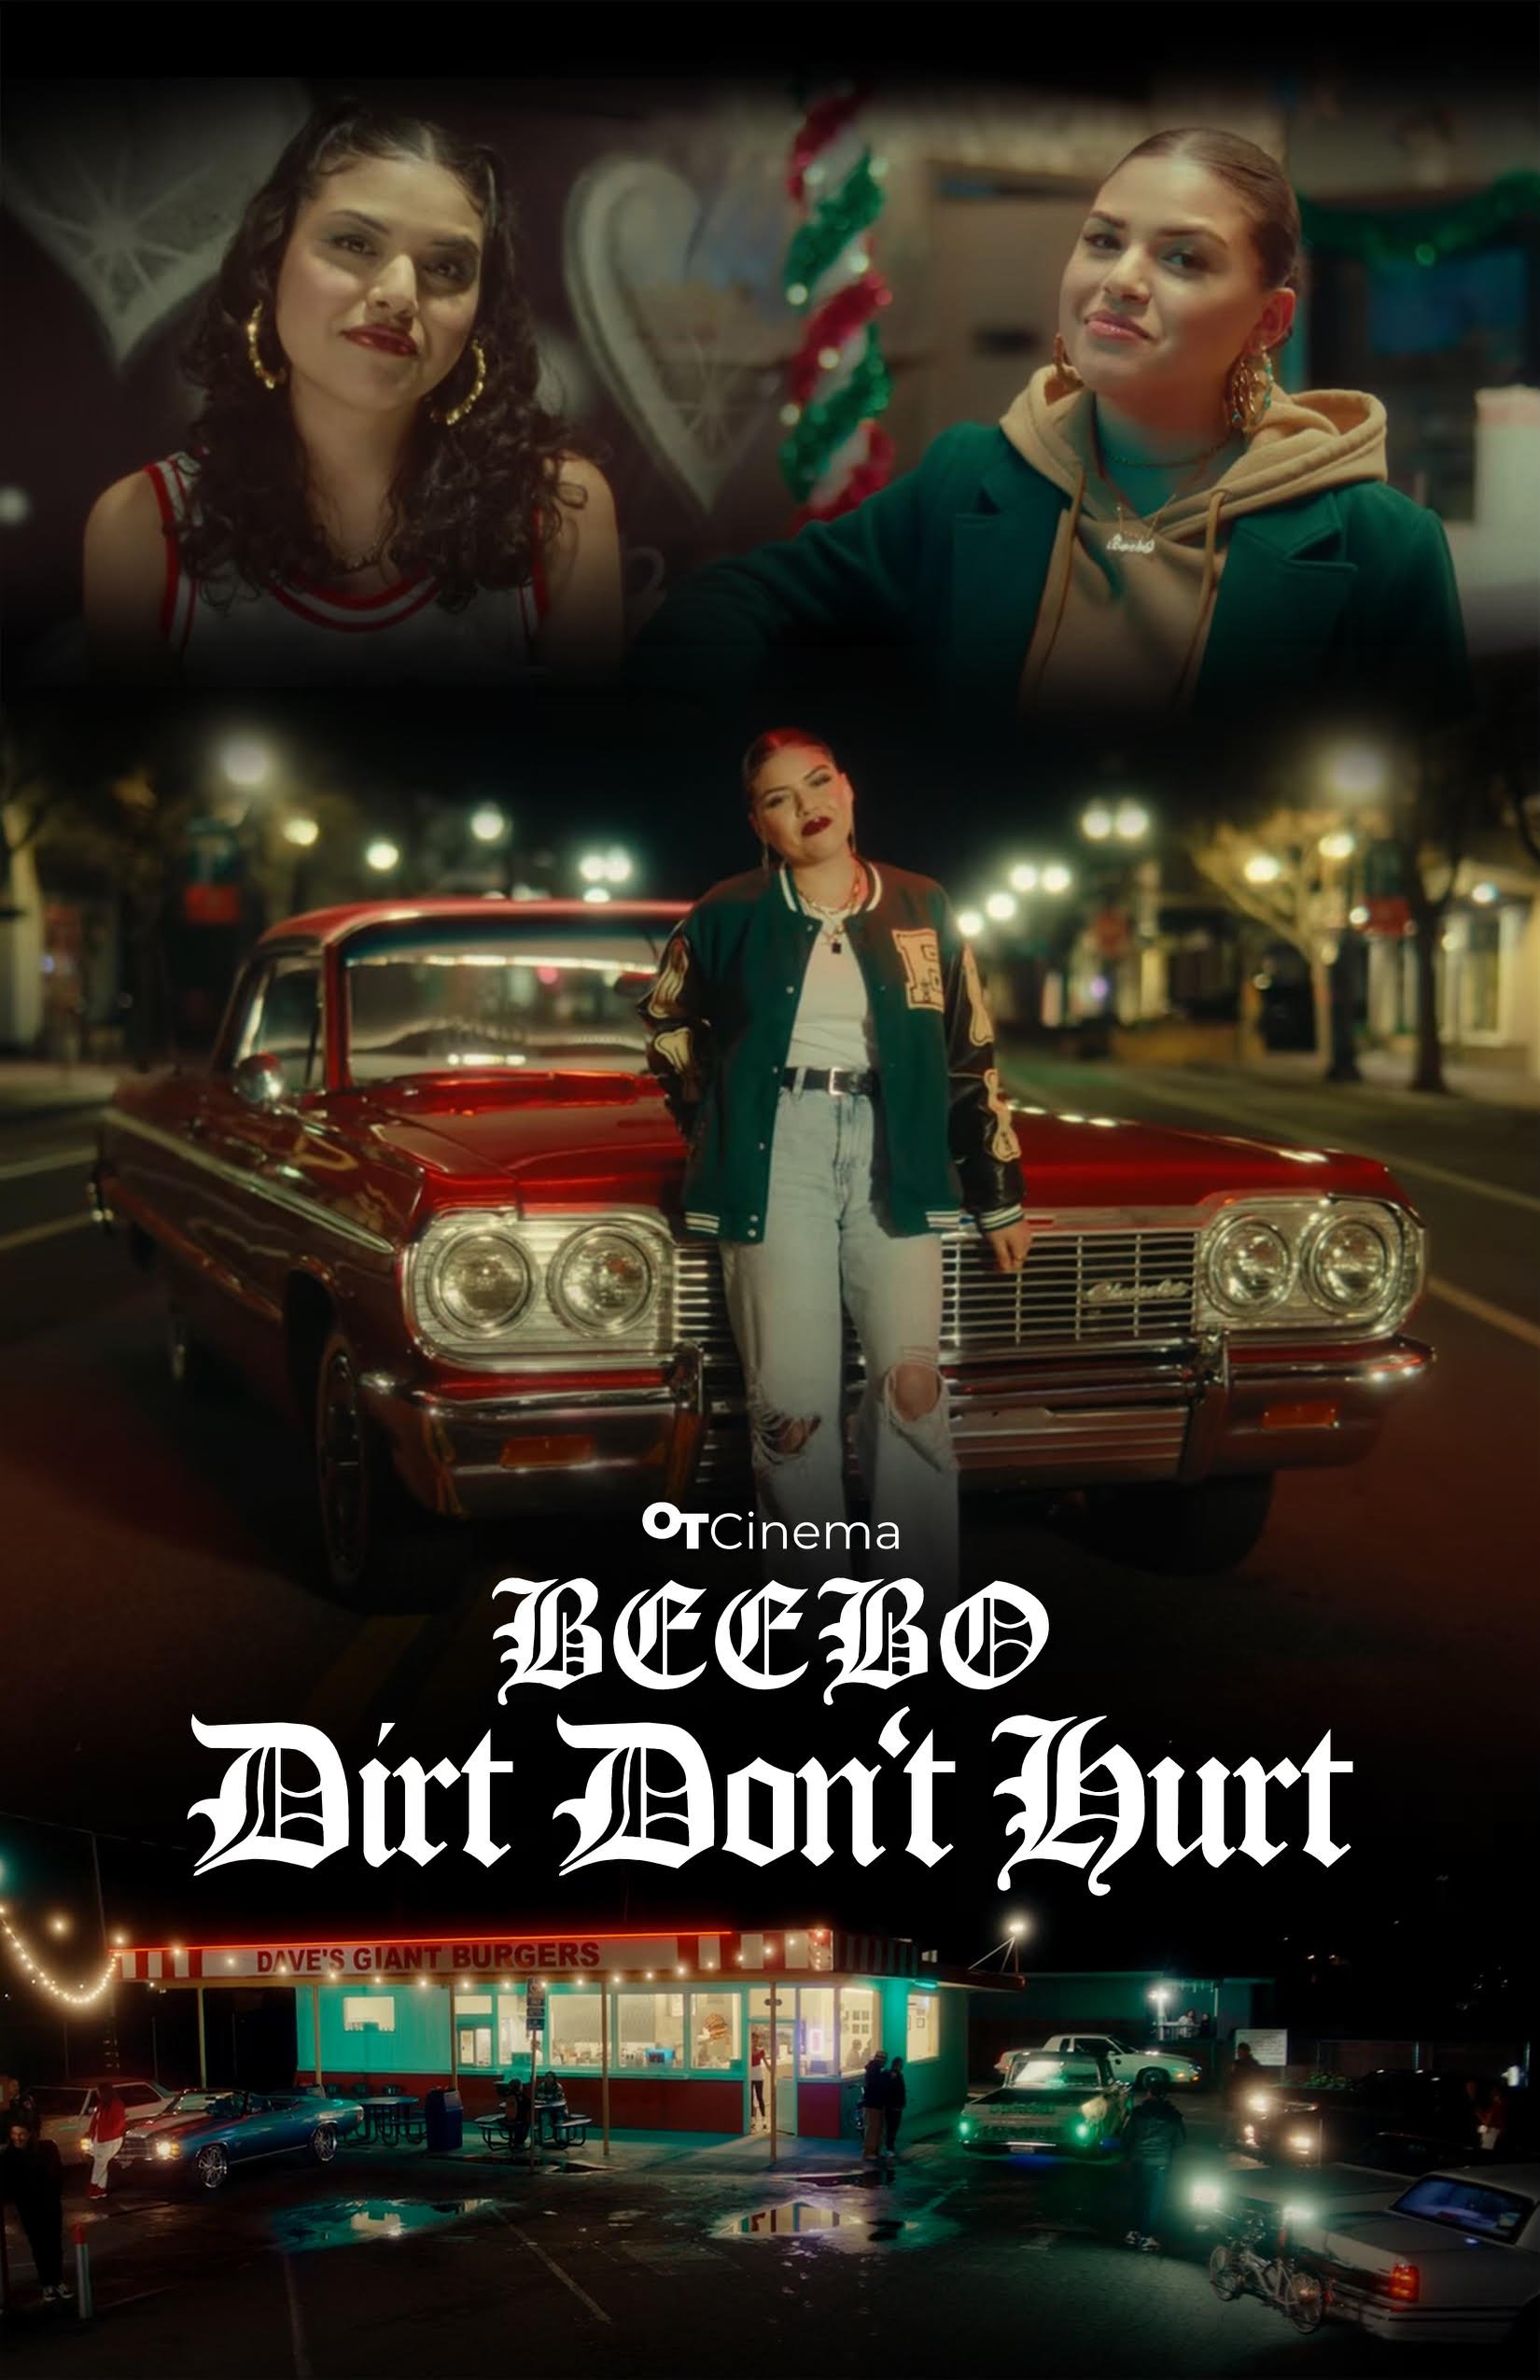 Dirt Don't Hurt by BEEBO